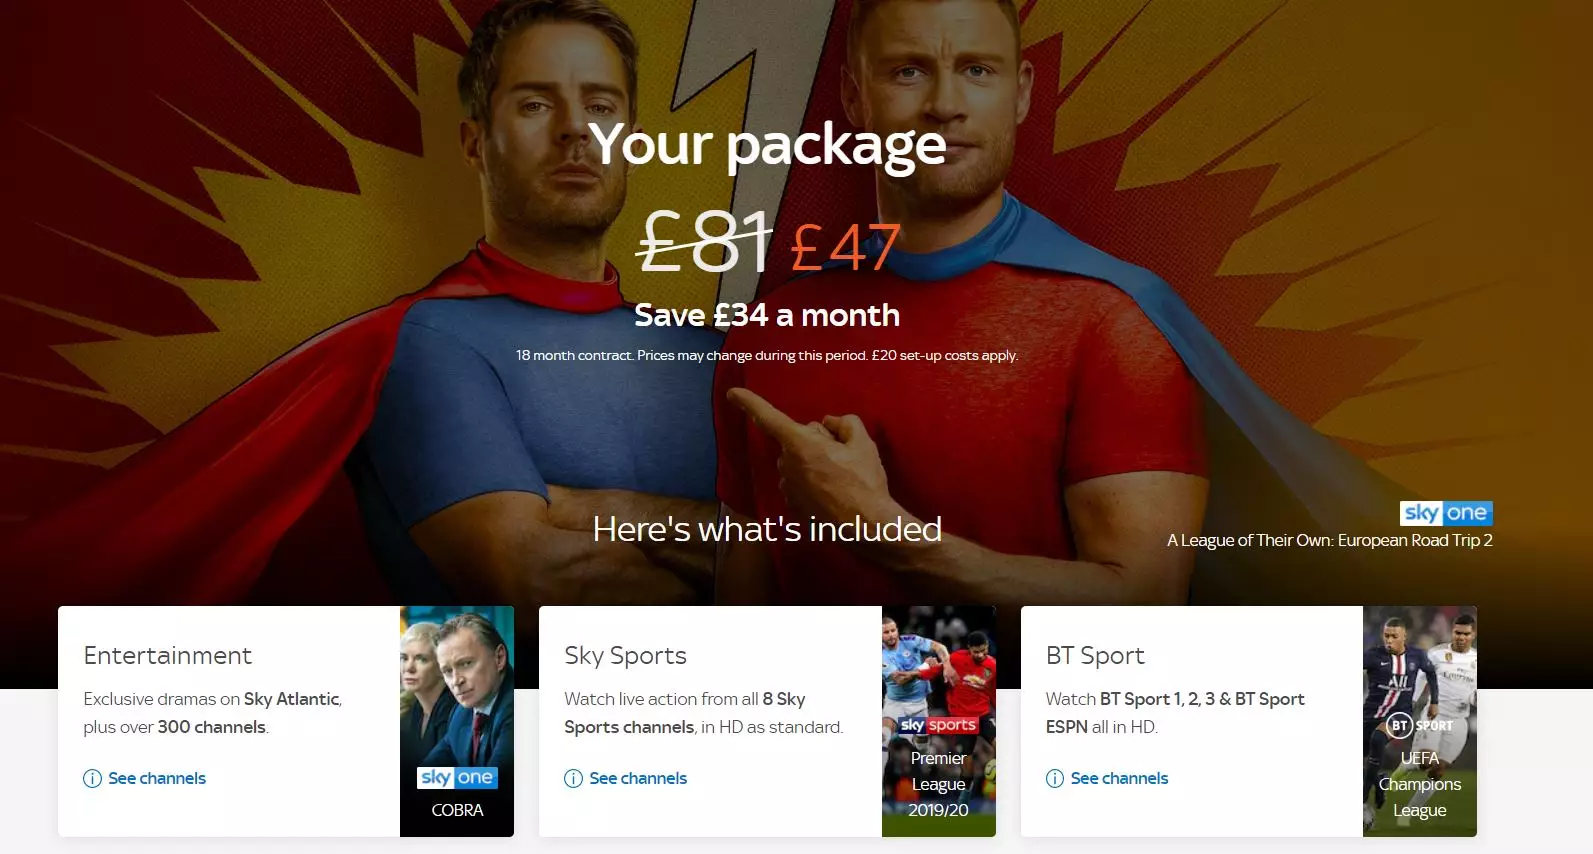 One of the deals for Sky Sports, BT Sport and Sky Entertainment.